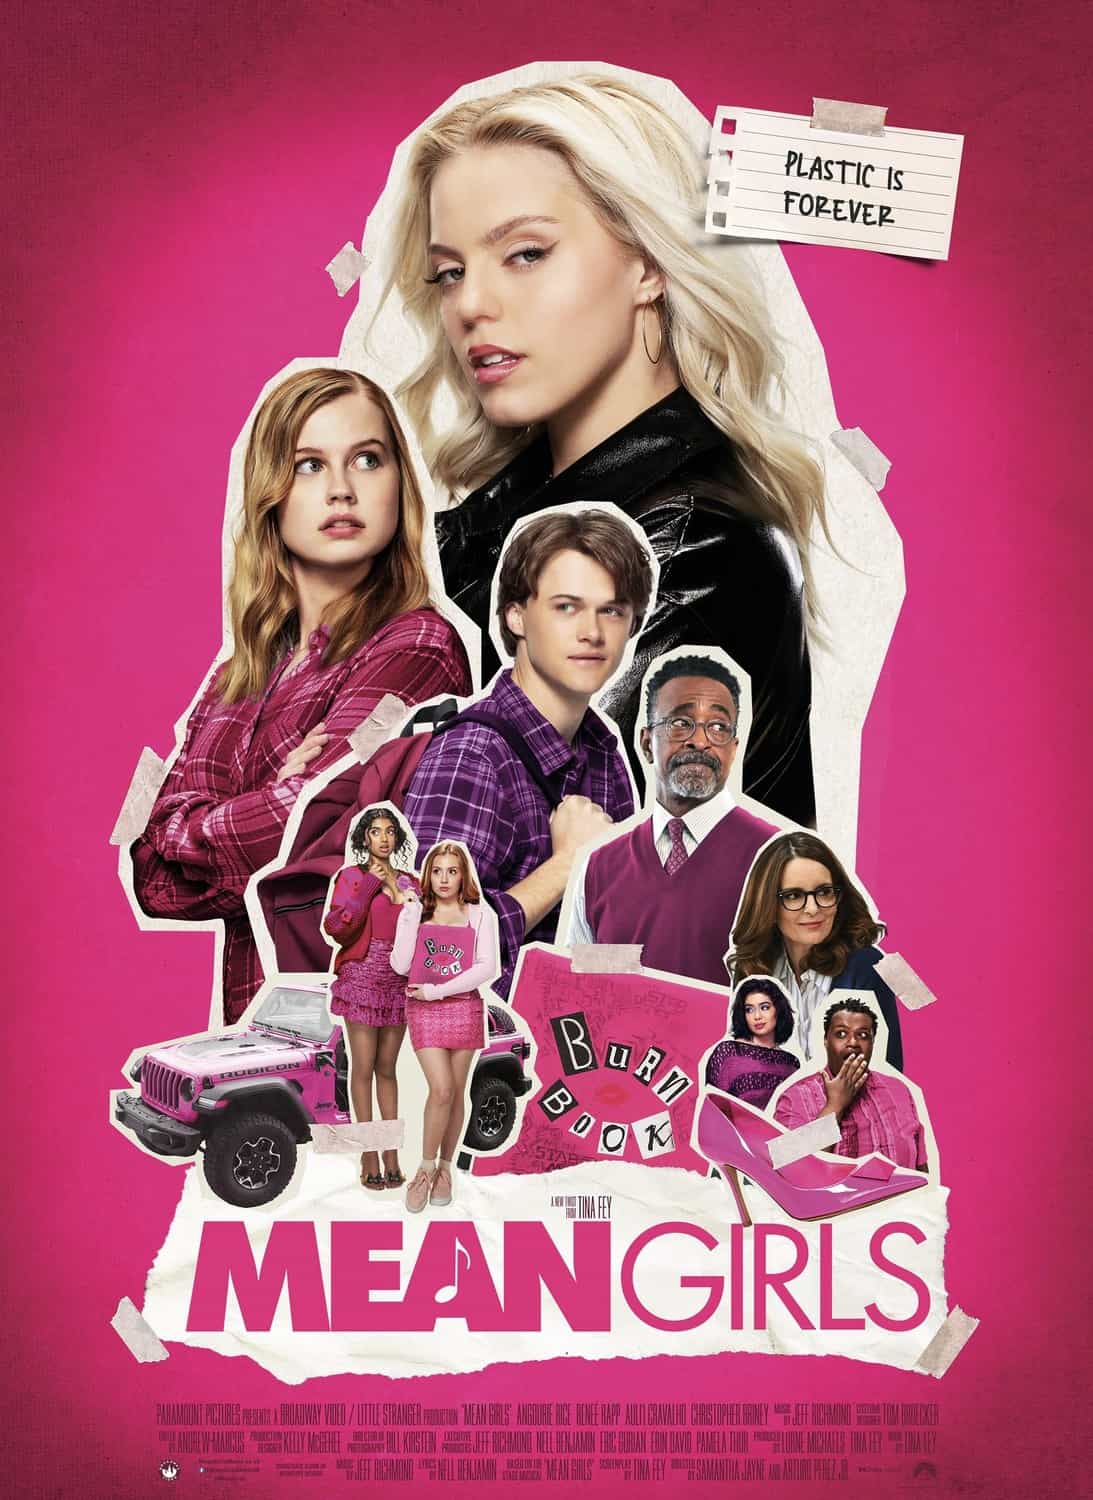 US Box Office Weekend Report 19th - 21st January 2024:  Mean Girls spends its second weekend at the top of the US box office with I.S.S. the top new movie at 7